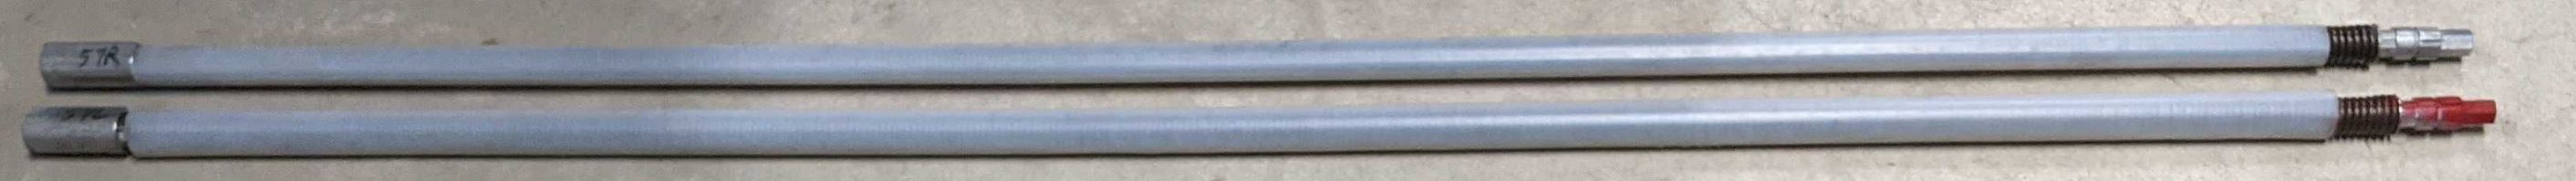 Wayne Dalton Torquemaster springs come with both end cones and plastic liners.